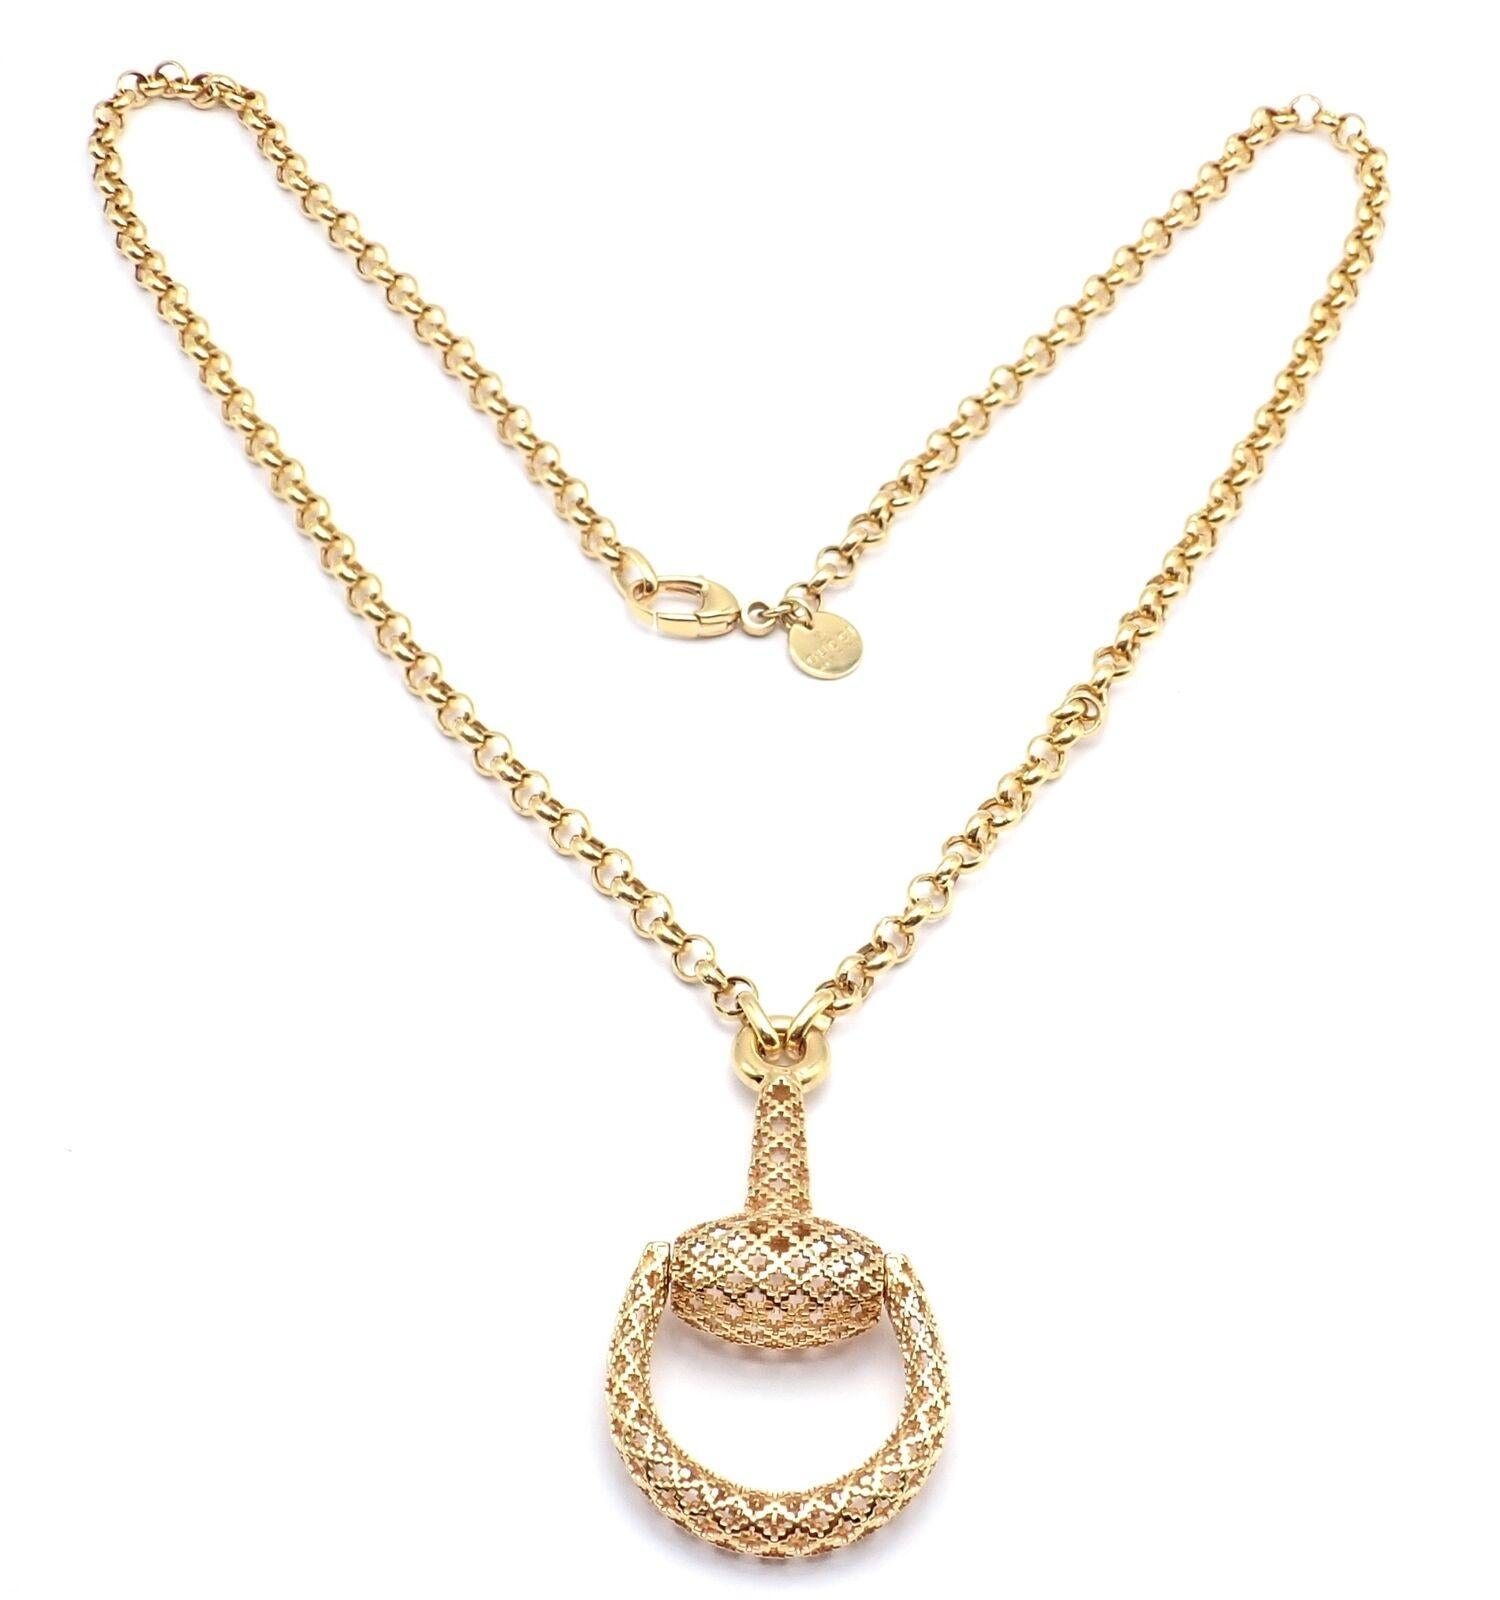 Gucci Large Horsebit Pendant Link Chain Necklace In Excellent Condition For Sale In Holland, PA